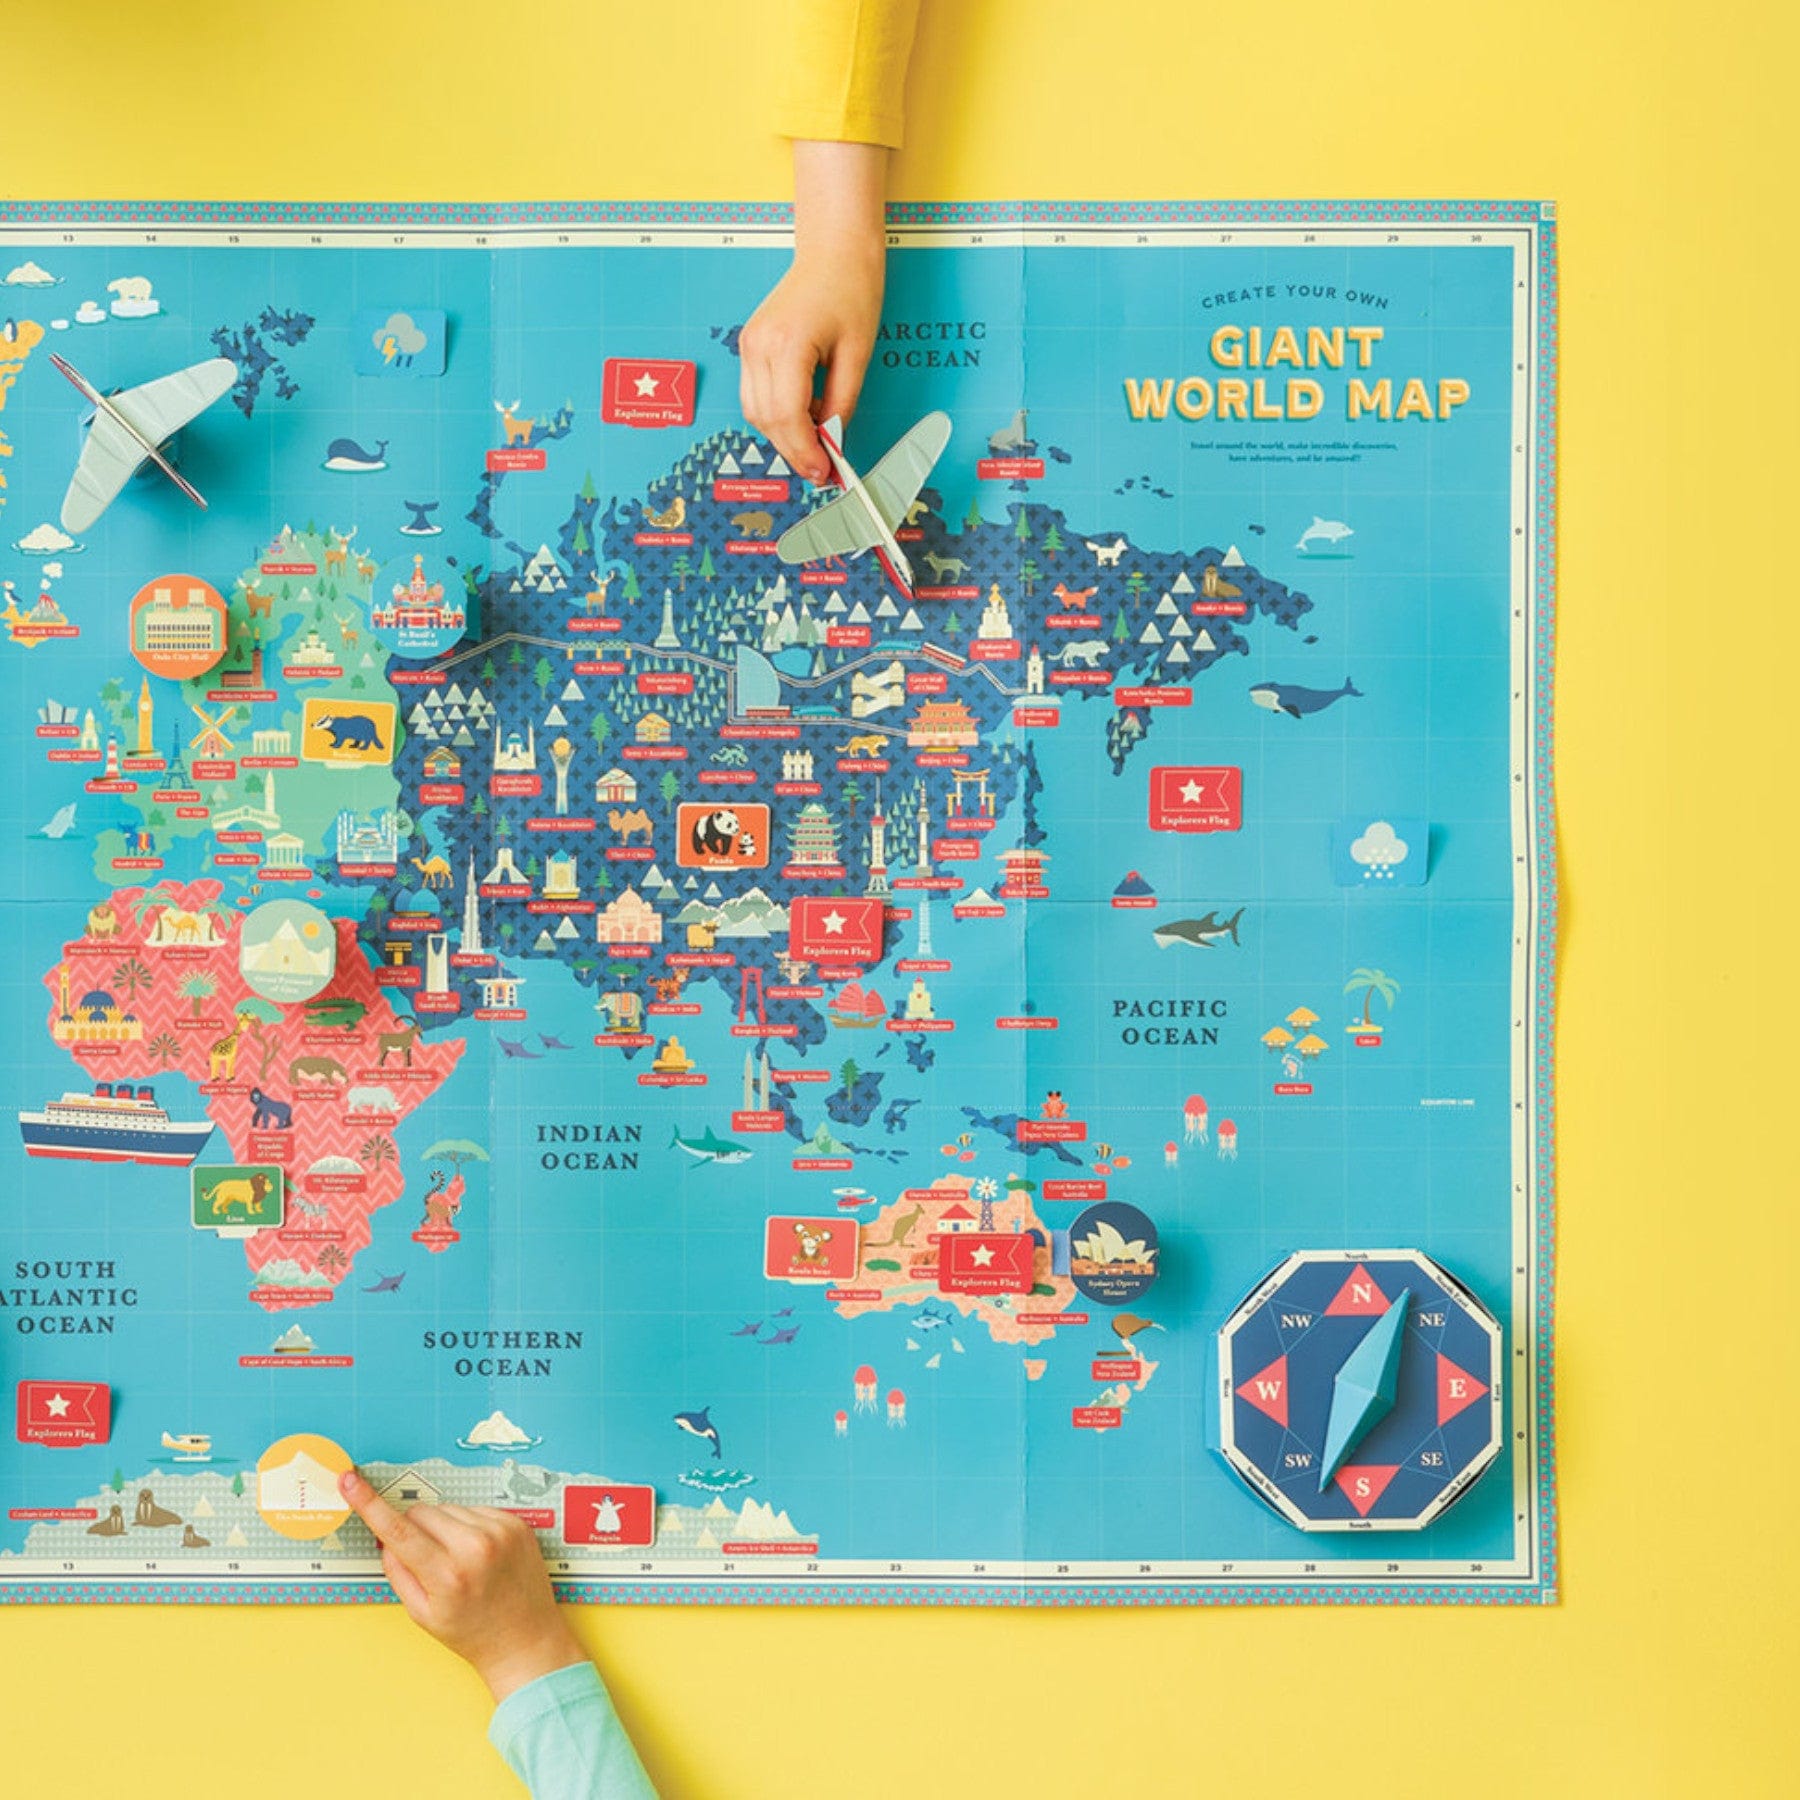 Person interacting with a colorful illustrated giant world map on yellow background, educational tool for children, geography learning activity, interactive wall map with landmarks and animals, hands placing or pointing at elements on the map.